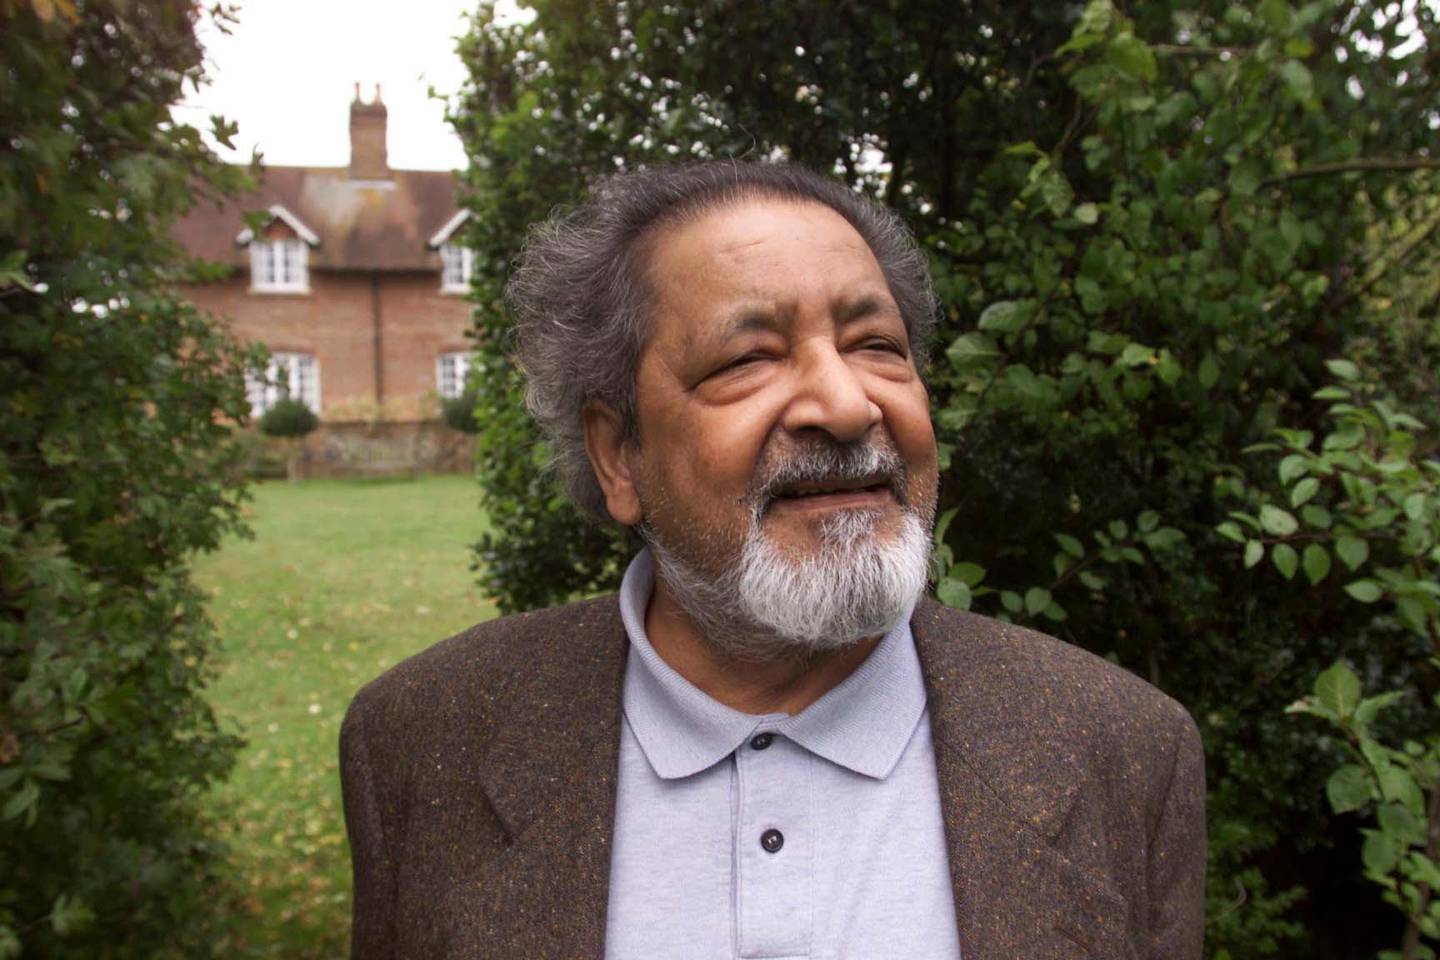 FILE - This 2001 file photo shows British author V.S. Naipaul in Salisbury, England. The Trinidad-born Nobel laureate whose celebrated writing and brittle, provocative personality drew admiration and revulsion in equal measures, died Saturday, Aug. 11, 2018, at his London home, his family said. He was 85. (Chris Ison/PA via AP)